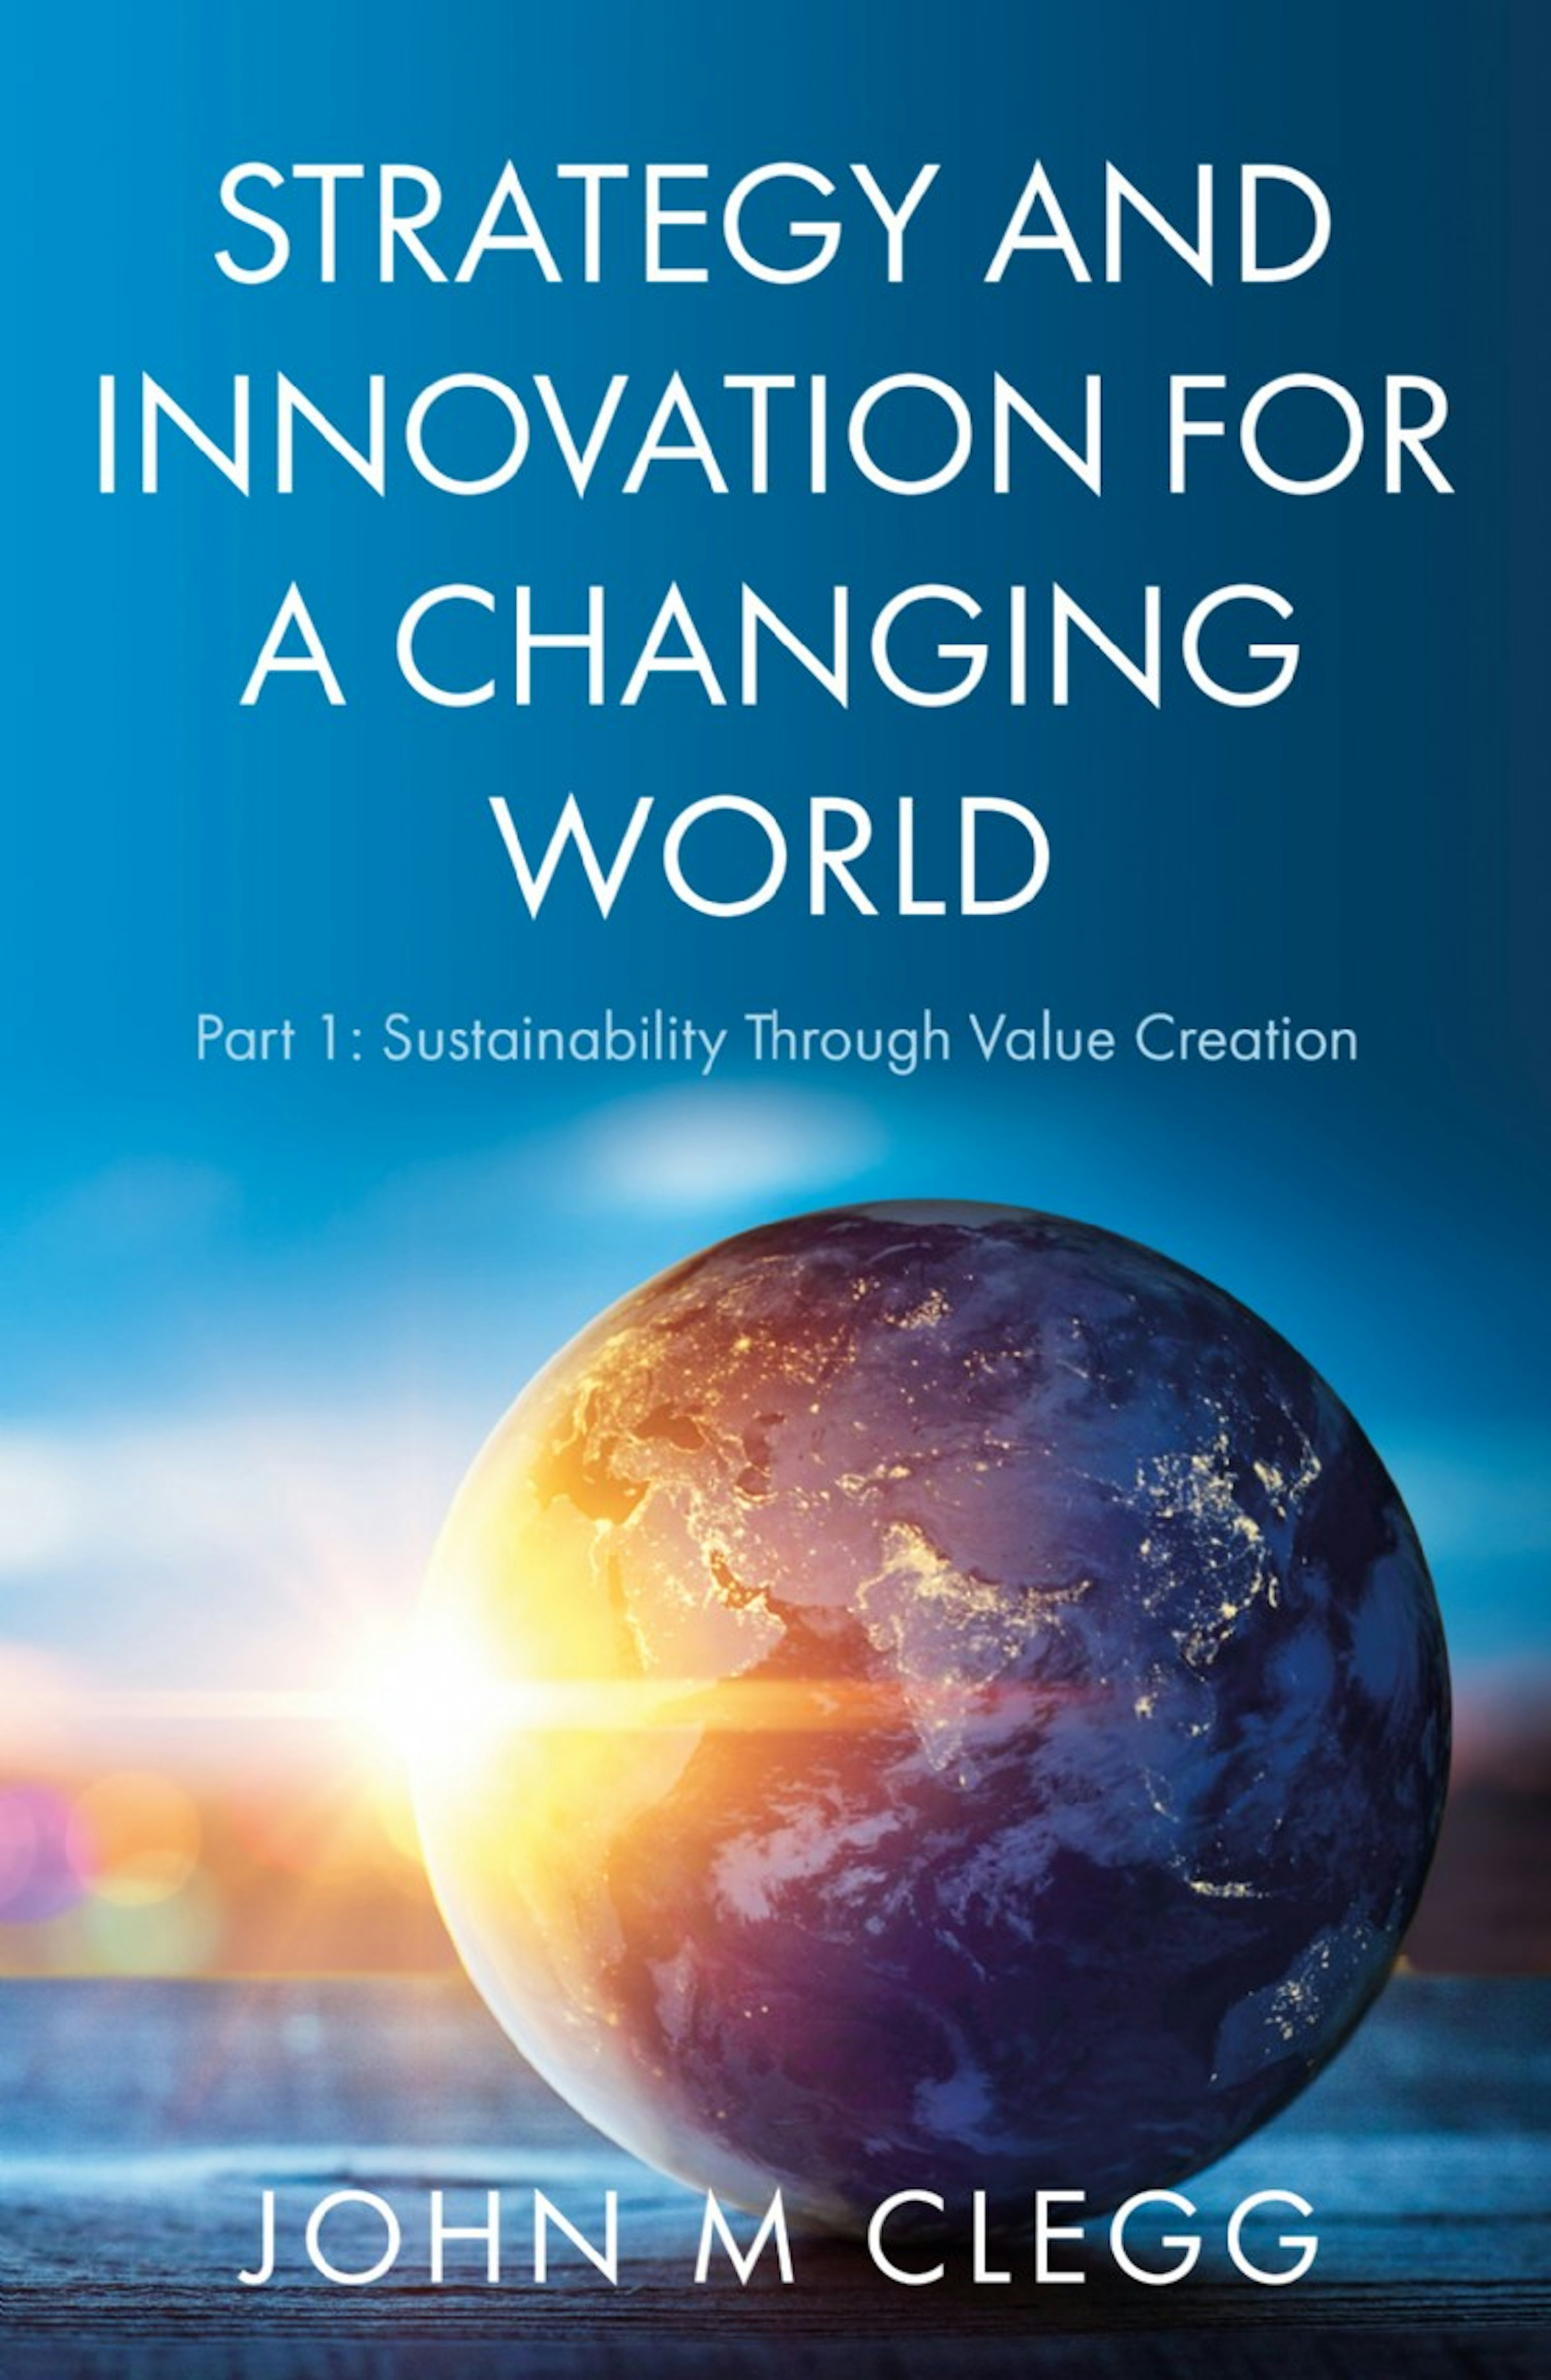 Strategy and Innovation for a Changing World